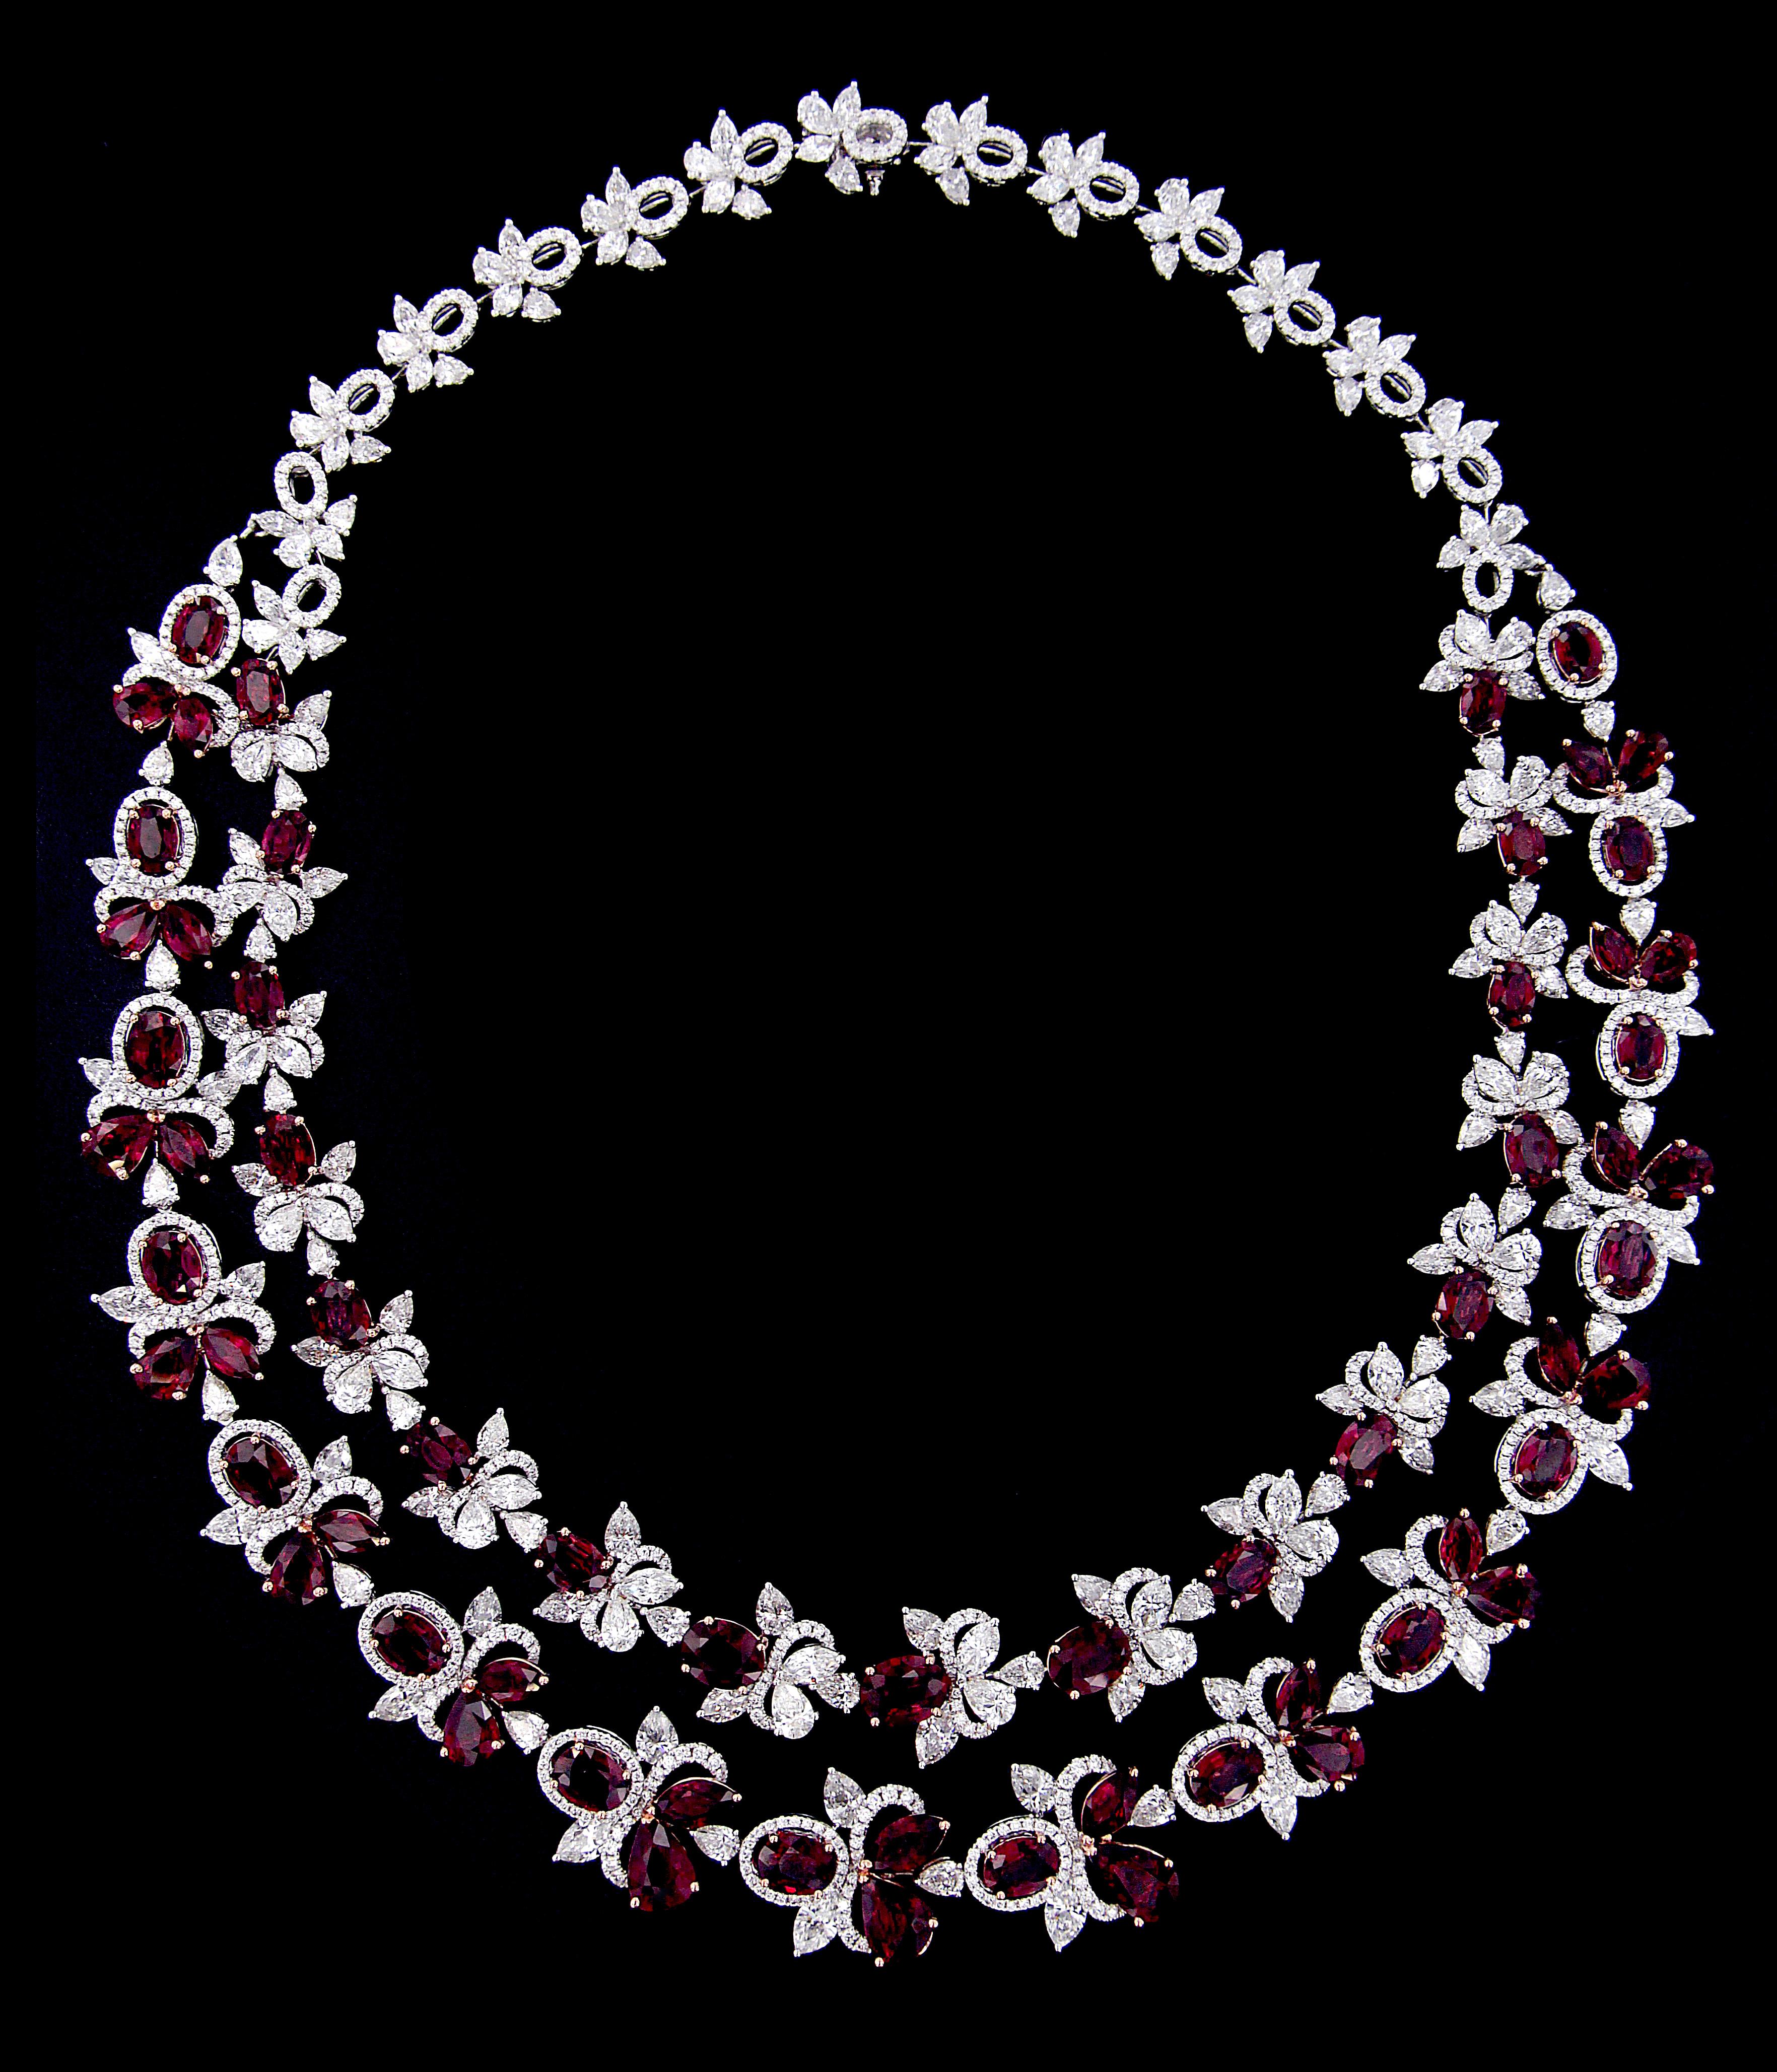  Exquisite 18 Karat White Gold, Diamonds And Ruby Set 
Necklace:	
Diamonds of approximately 32.104 carats and rubies approximately of 43.705 carats, mounted on 18 karat white gold necklace. The Necklace weighs approximately around 77.728